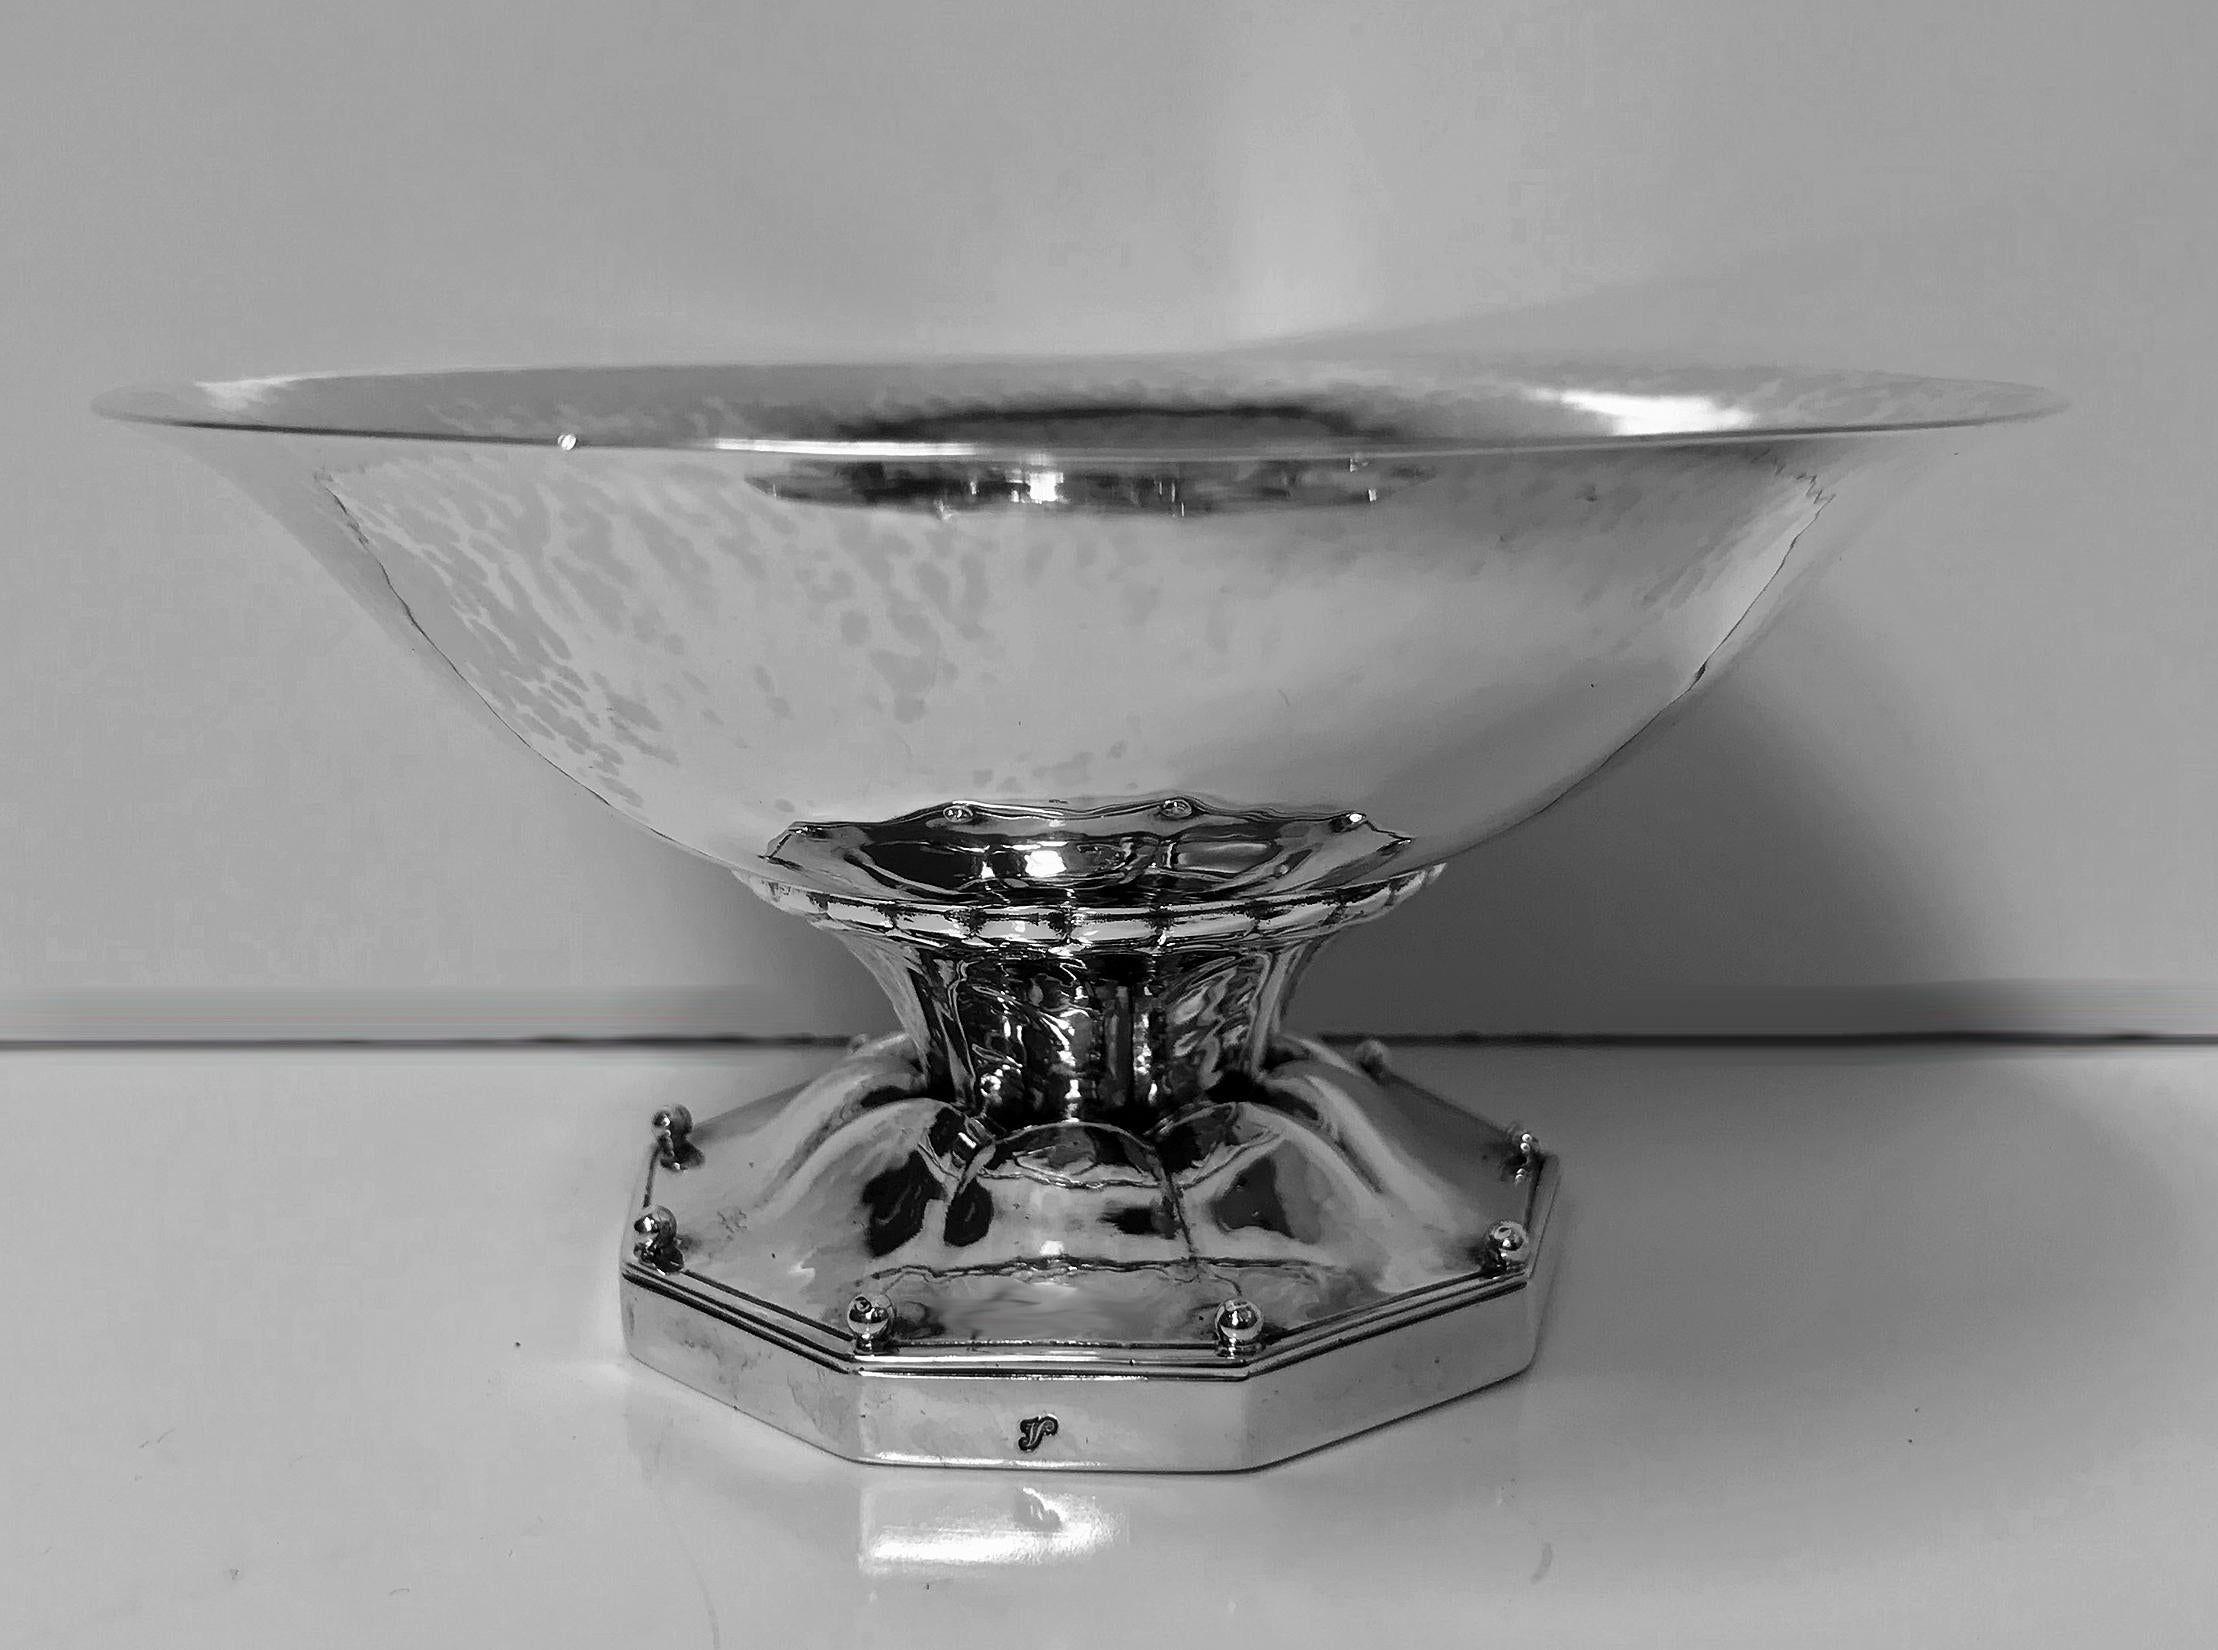 Georg Jensen sterling silver dish 1926-1932, design No 181A. Octagonal shape, handwrought, hammered. Full Georg Jensen marks, 1926-1932 mark with crown to underside and George Jensen Sterling 181A and Dutch tax mark early 20th century. Illustrated